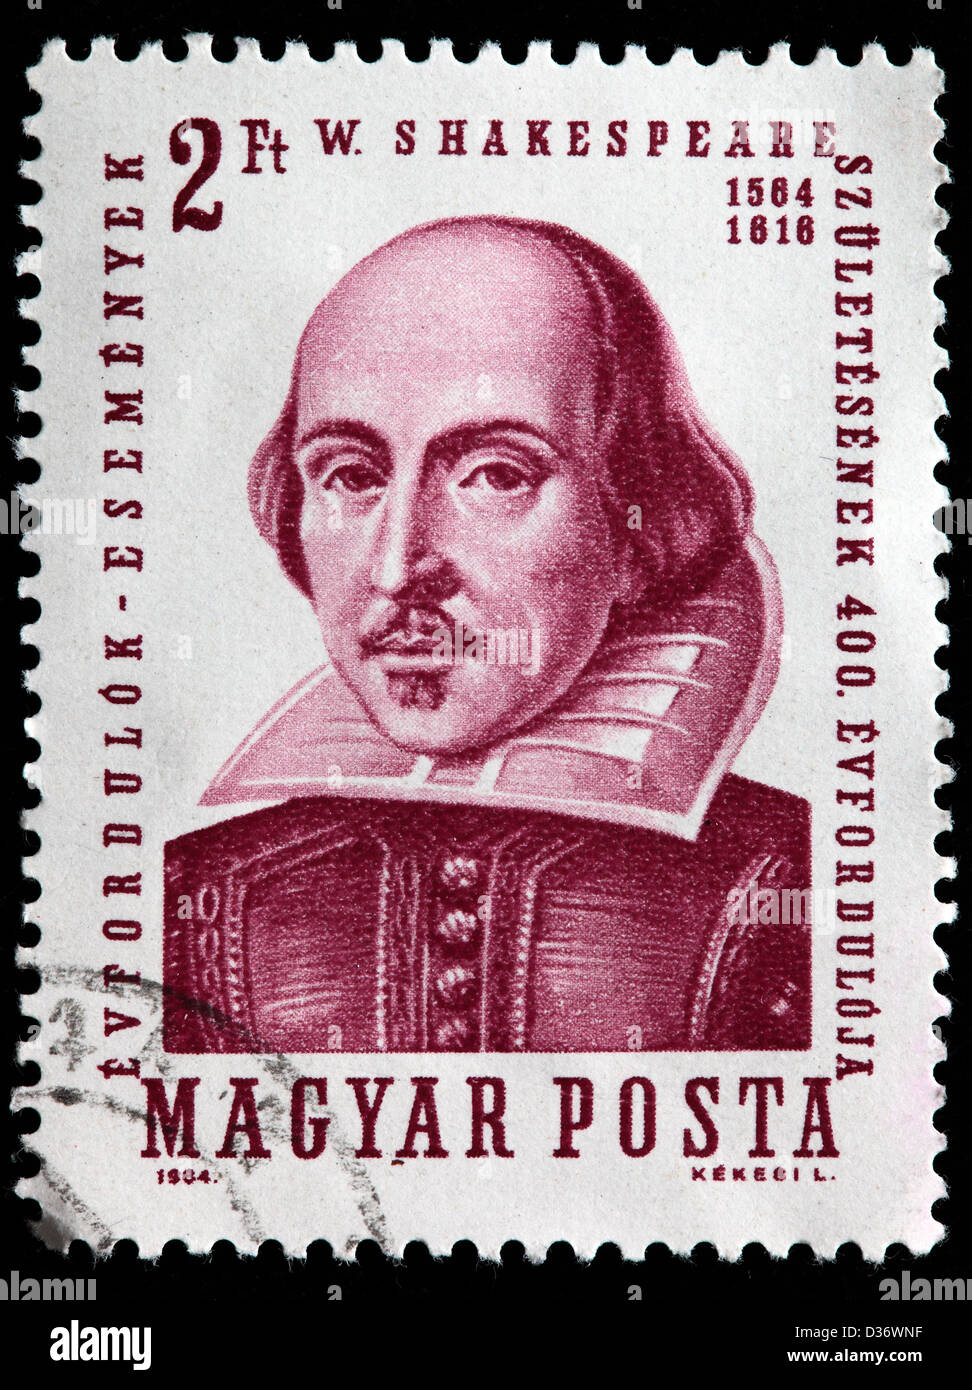 William Shakespeare, timbre-poste, Hongrie, 1964 Banque D'Images